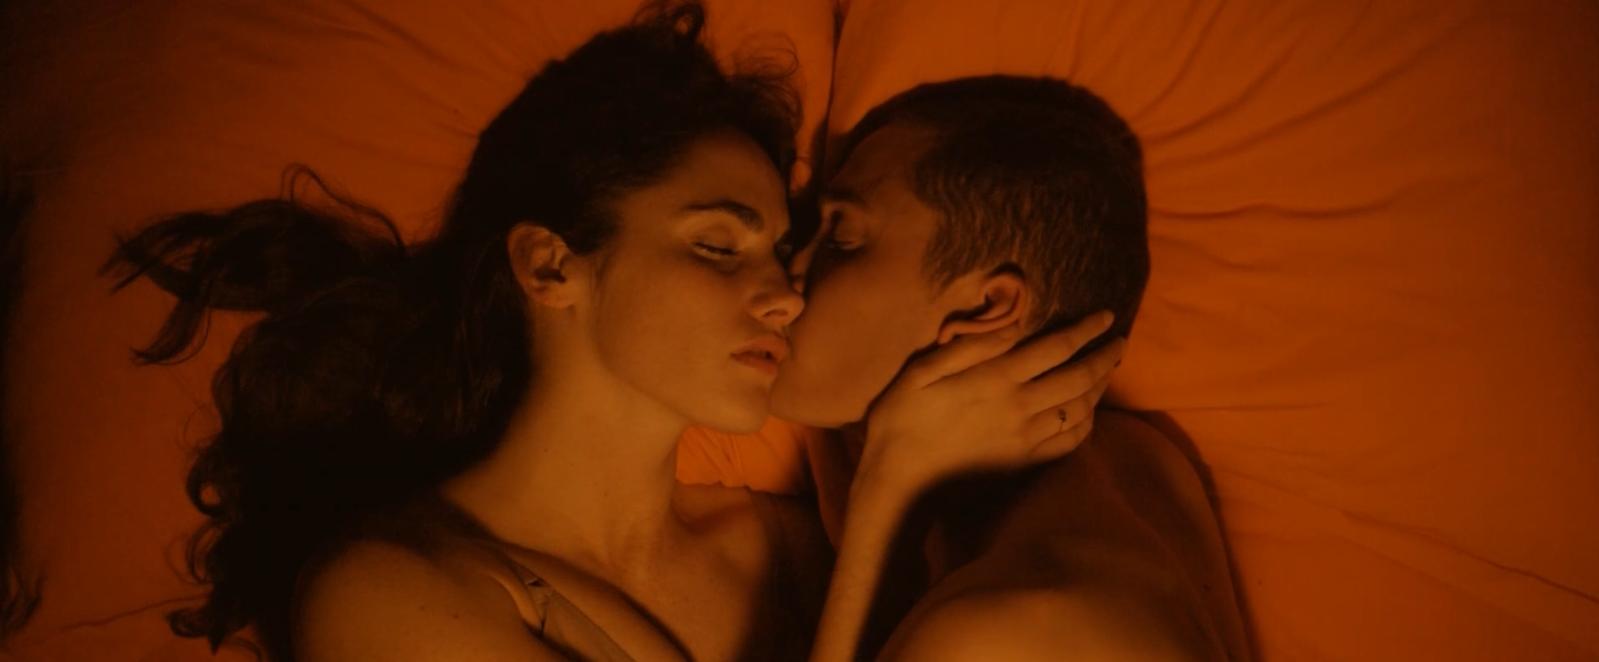 Sex scenes from the film love